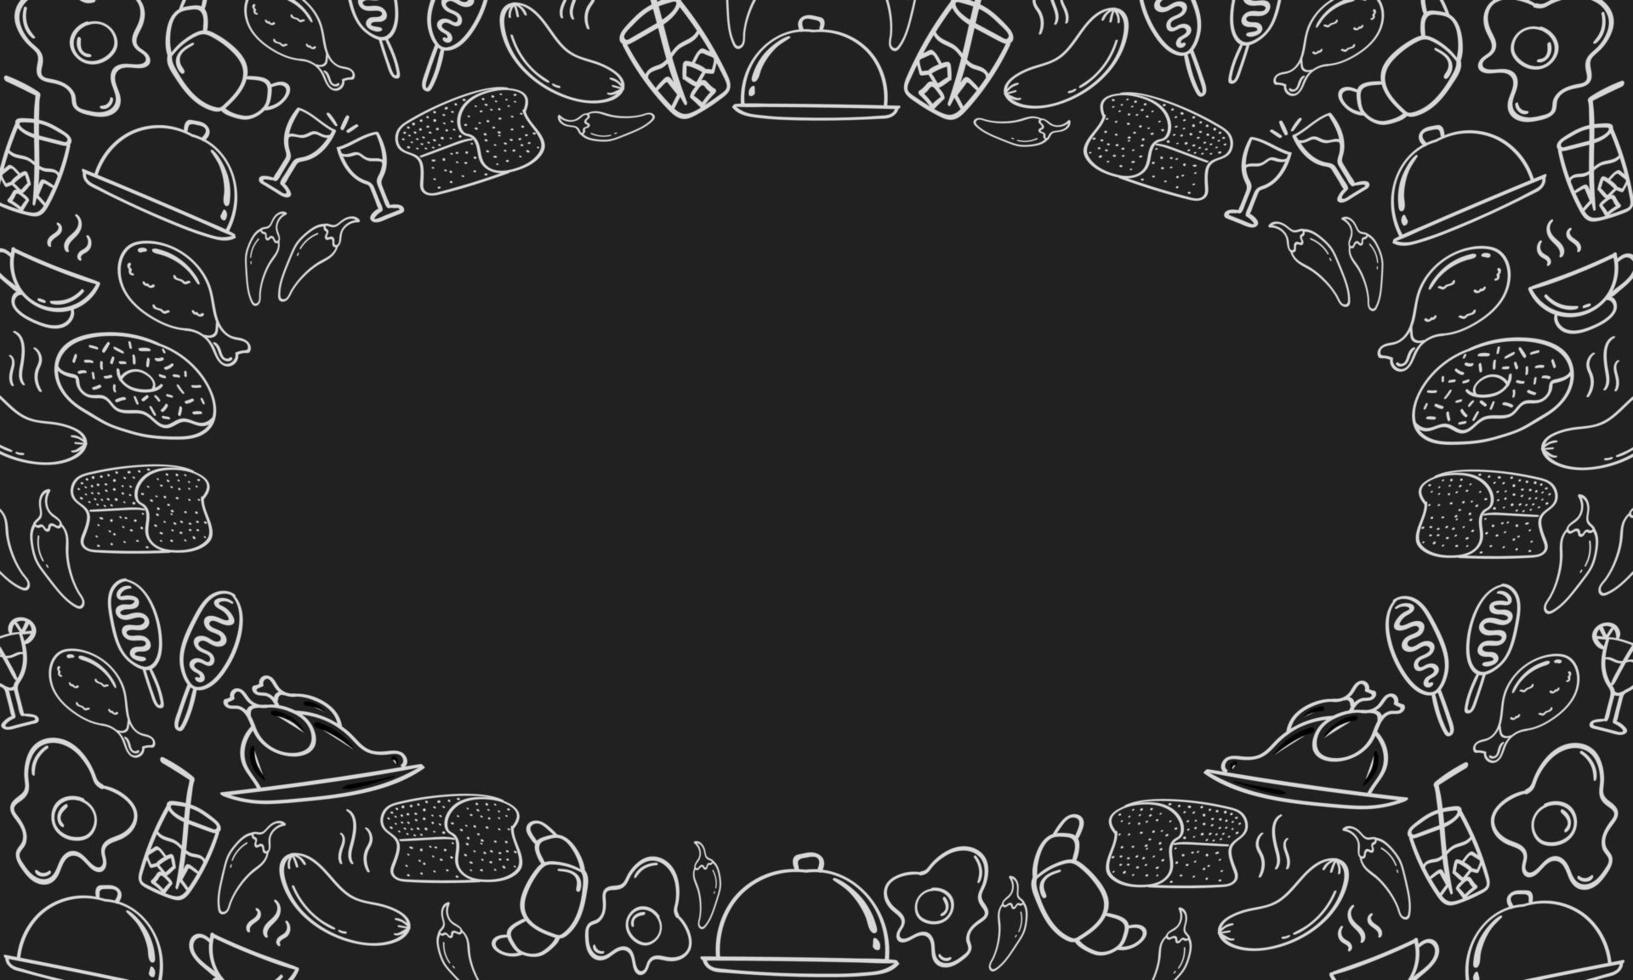 Frame of hand drawn food and beverage on chalkboard vector